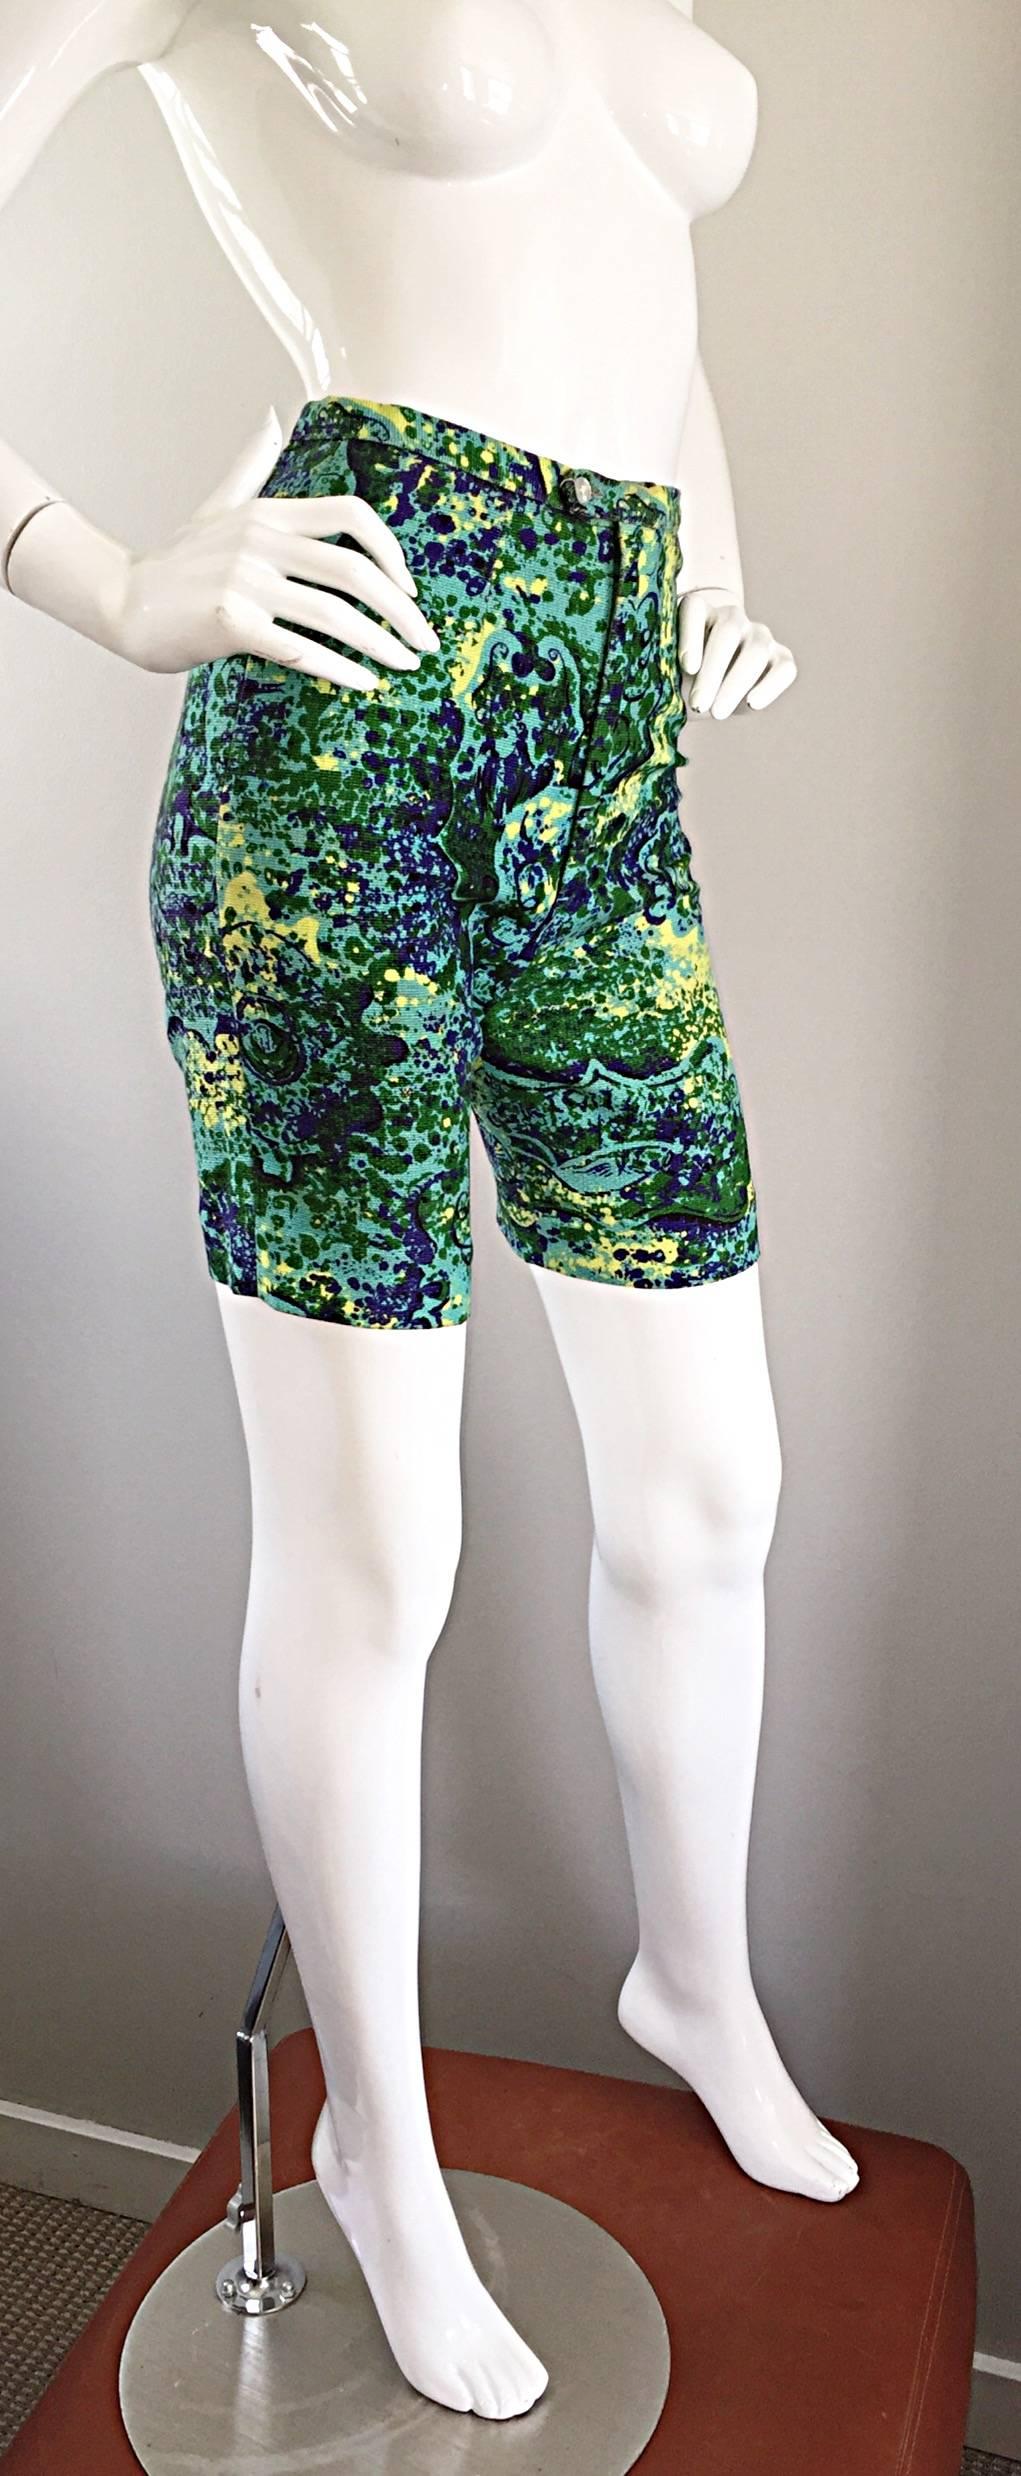 Rare 1960s Vintage Joseph Magnin High Waisted Watercolor 60s Shorts In Excellent Condition For Sale In San Diego, CA